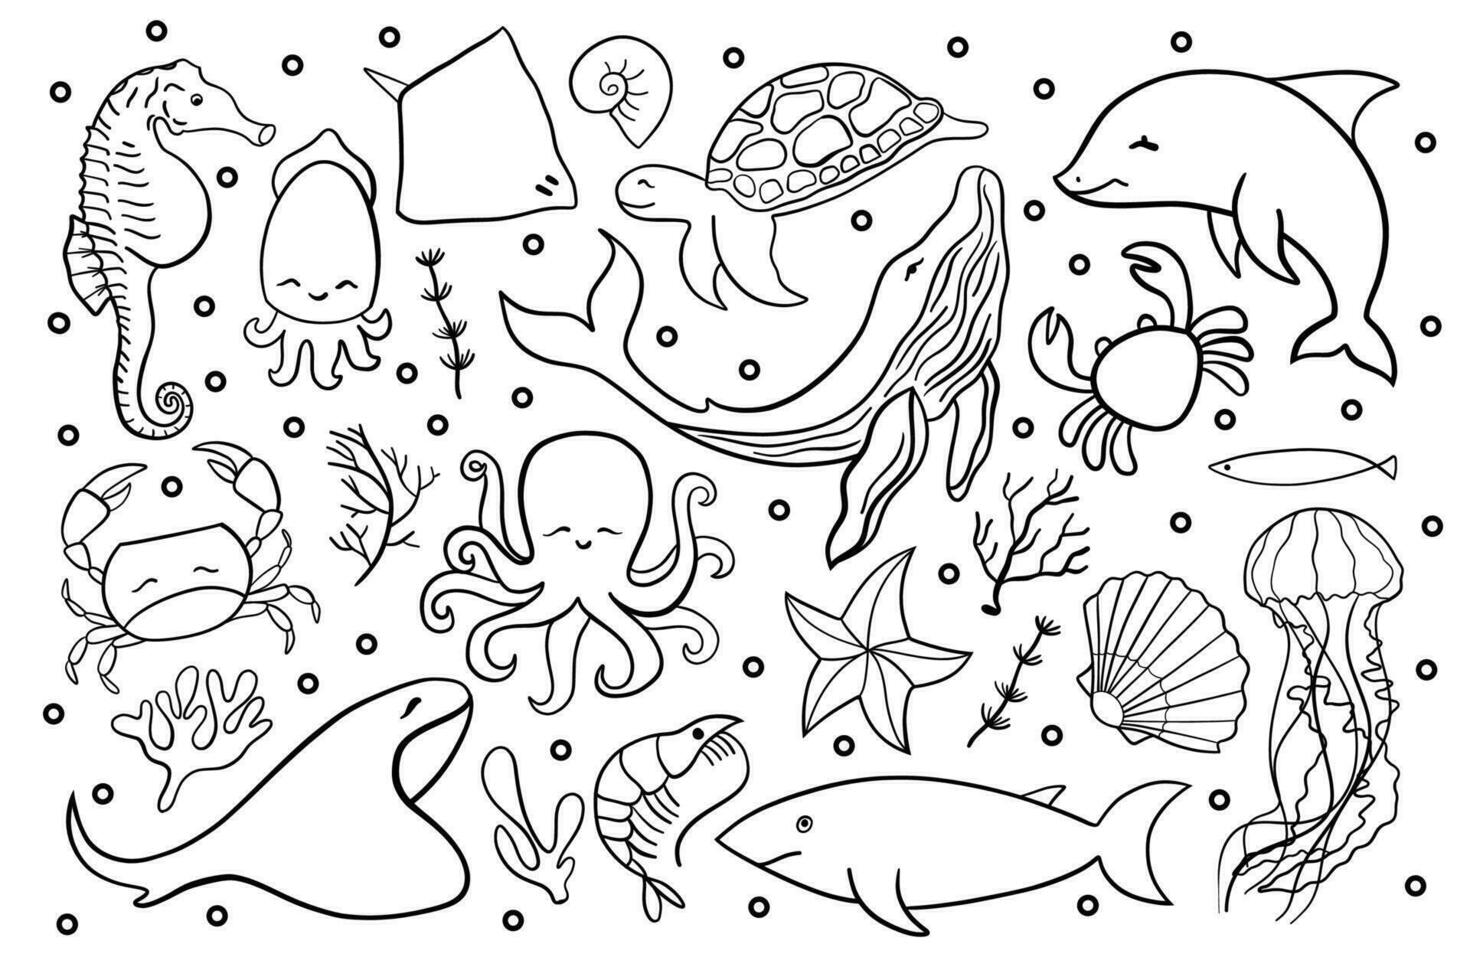 Set with hand drawn sea life elements. Vector doodle cartoon set of marine life objects for your design.